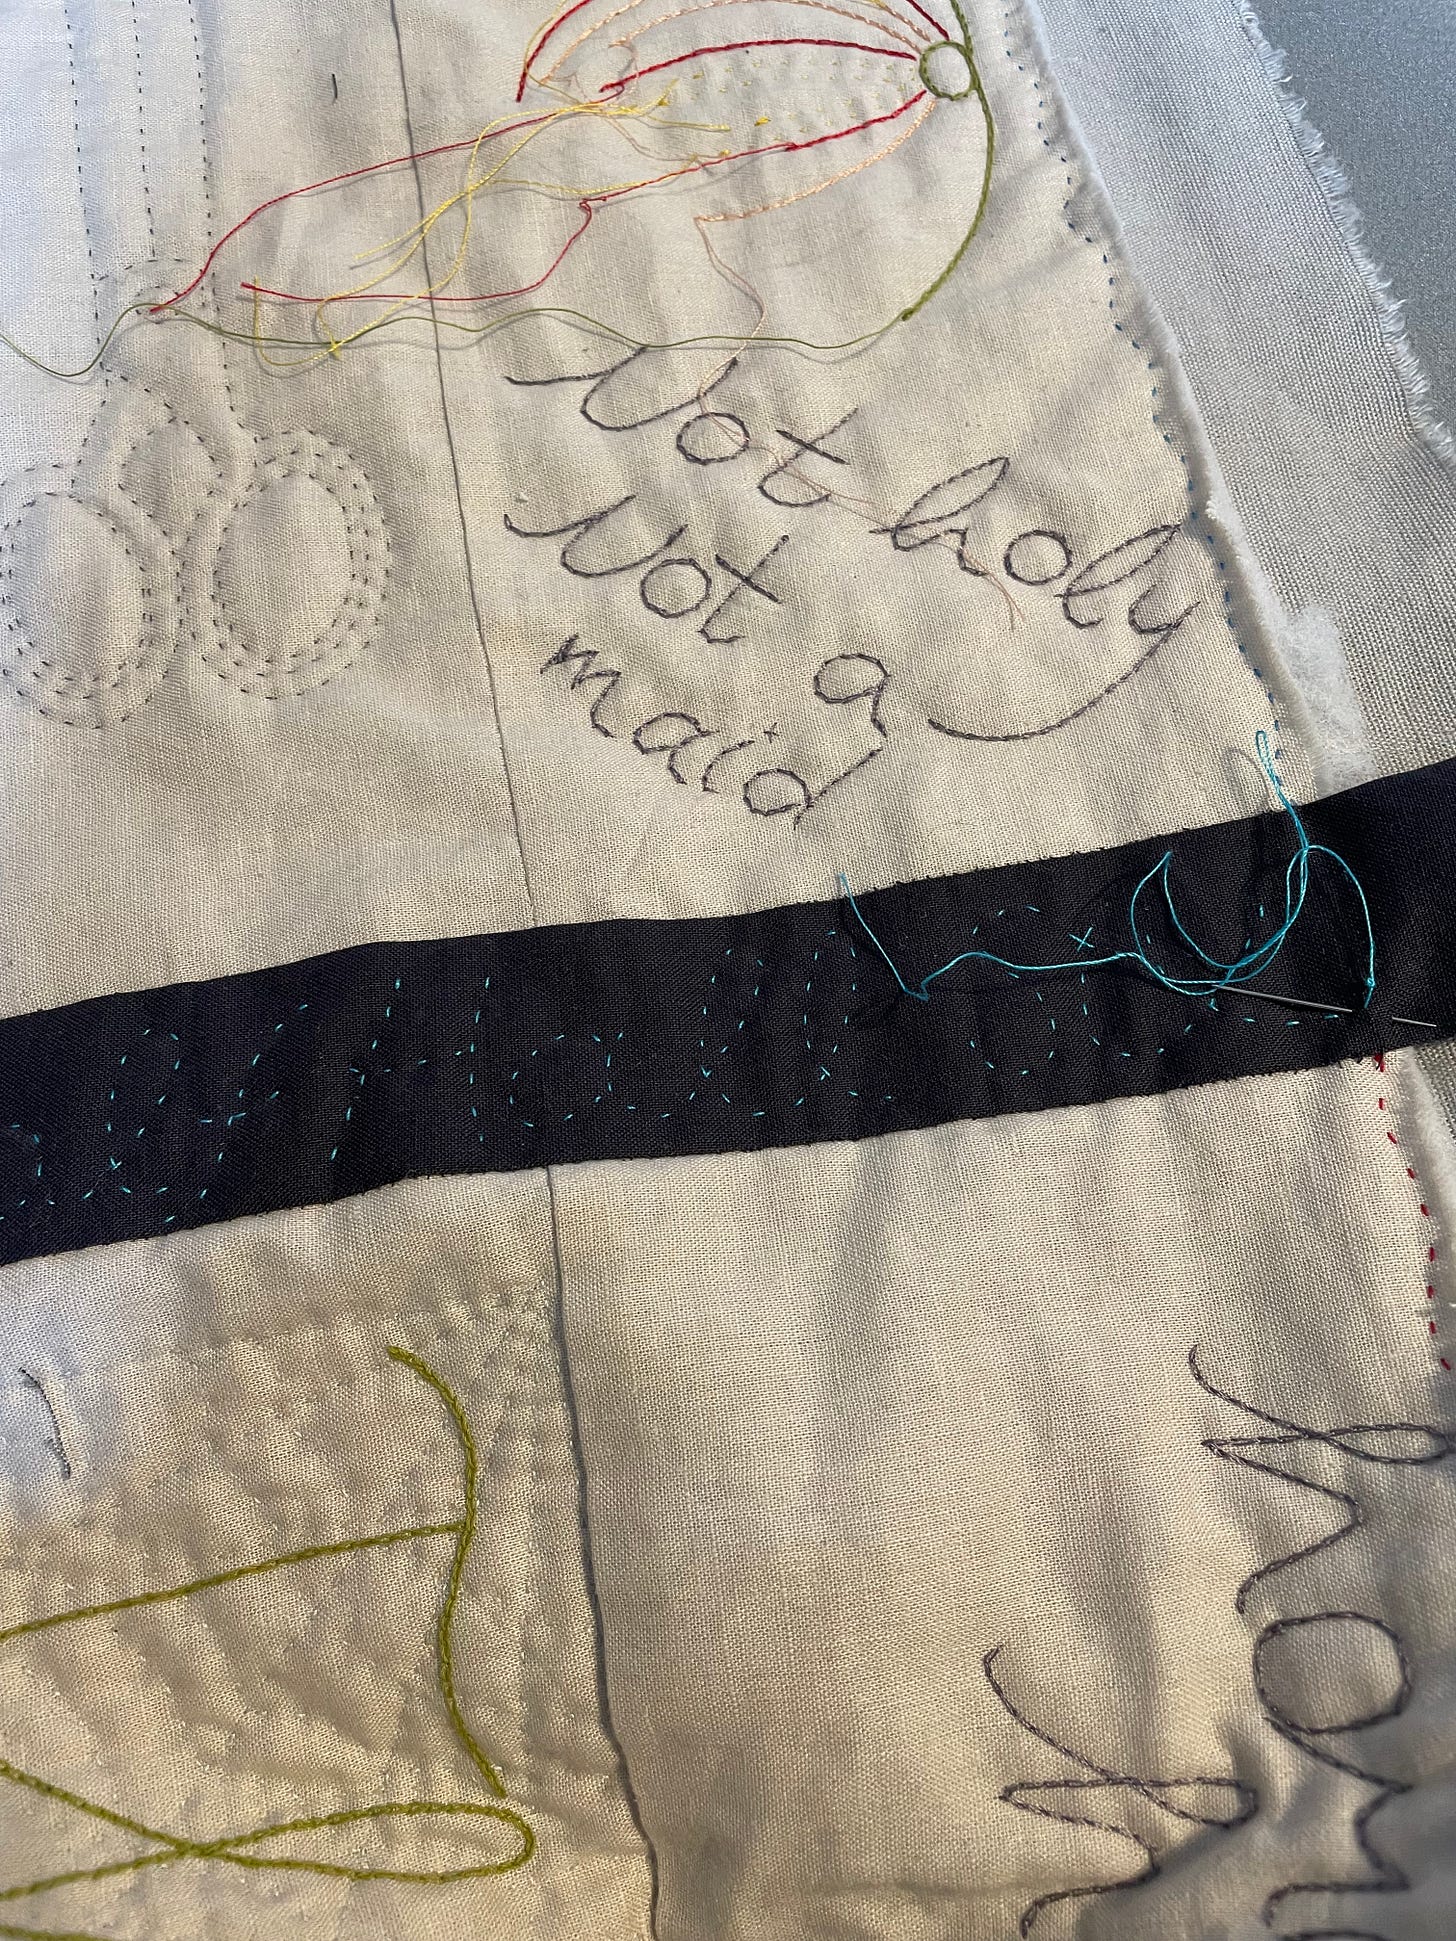 Quilted work - the words “Not holy Not a maid”, some scissors and a pomegranate are visible. There is a needle with blue thread in a strip of dark cloth.